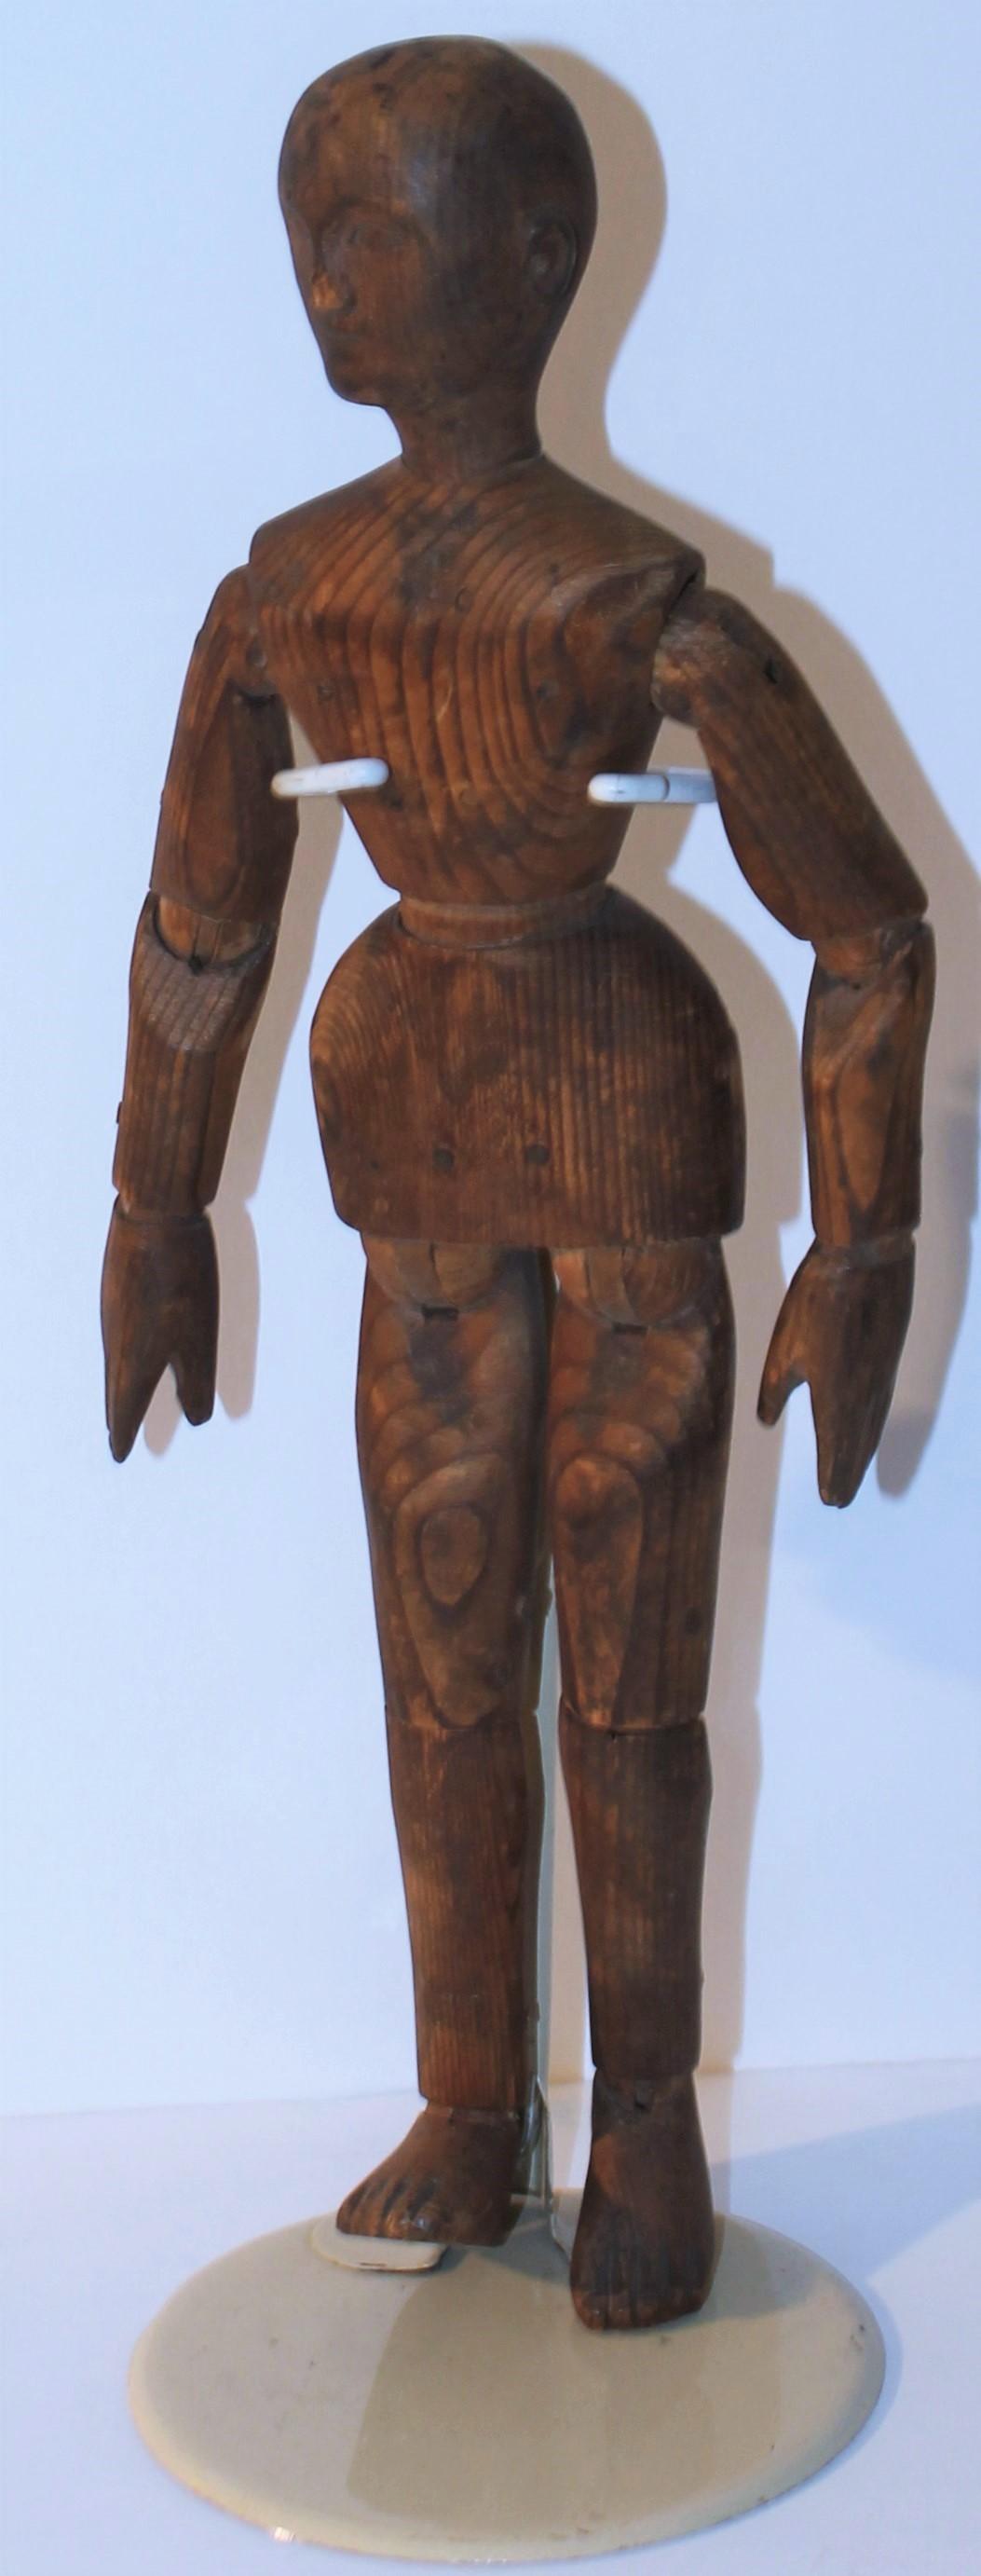 Hand-Carved 19thc Wood Hand Carved Articulated Mannequin